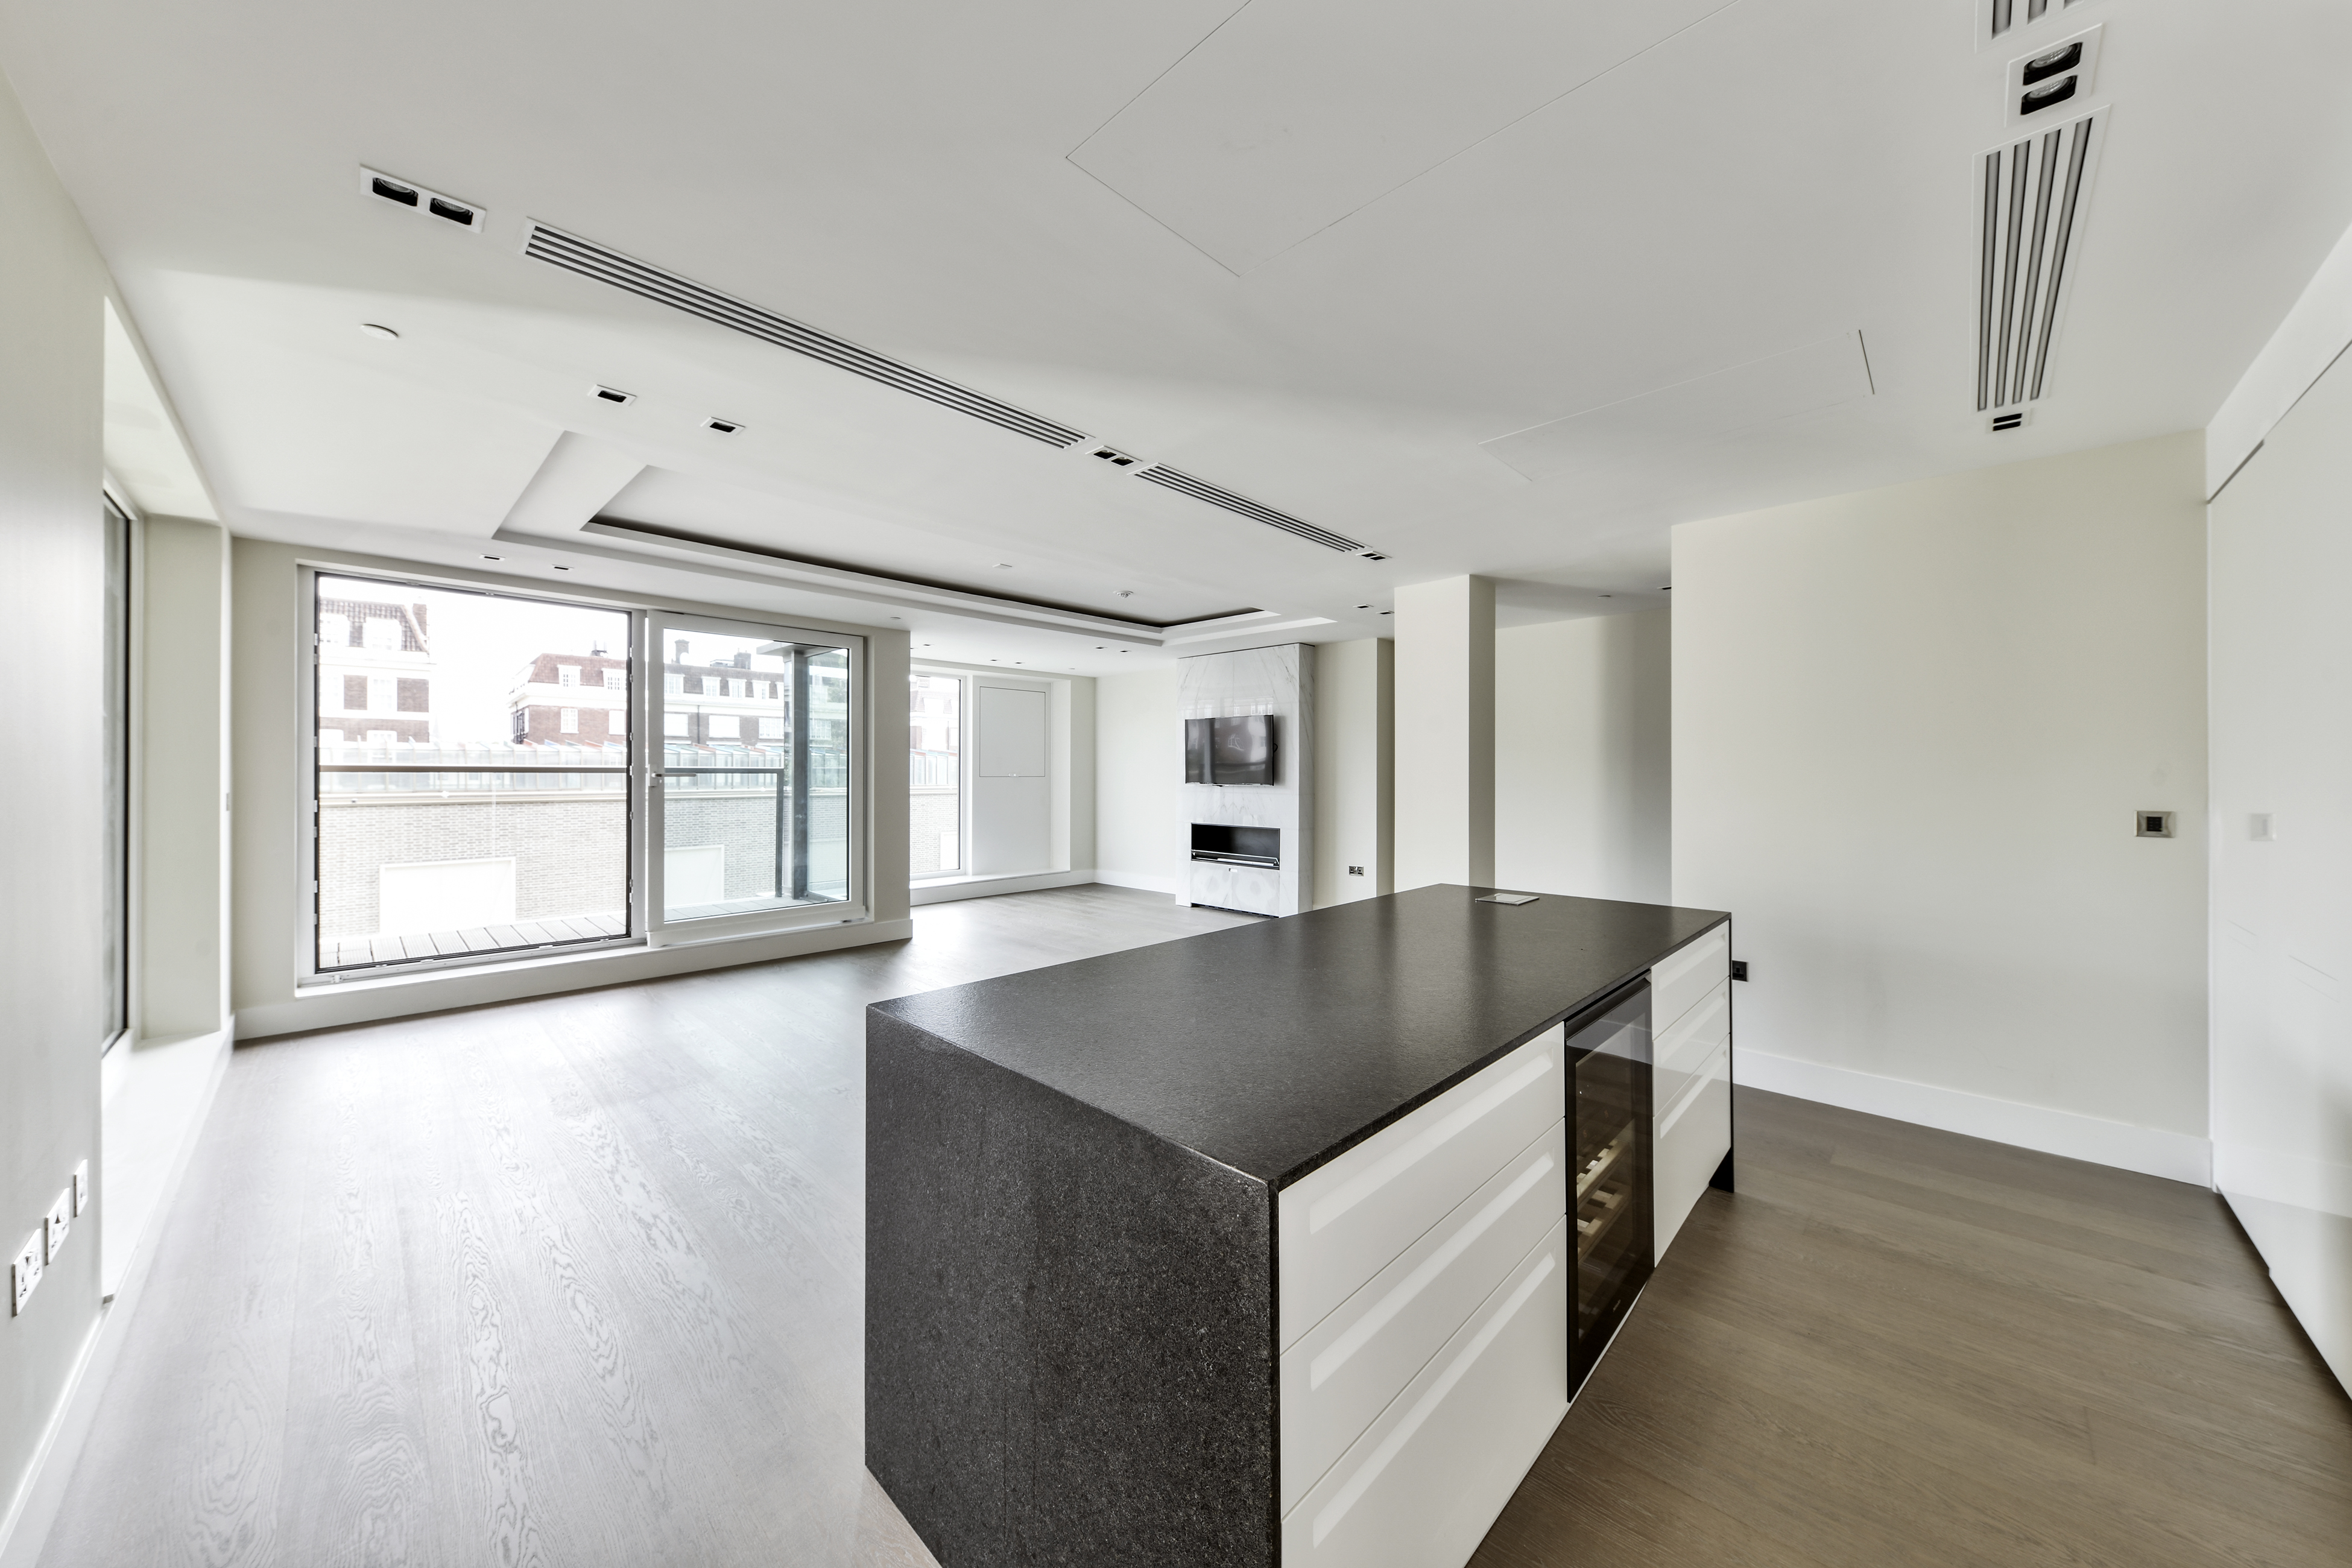 A sleek three-bedroom apartment in a coveted part of Kensington